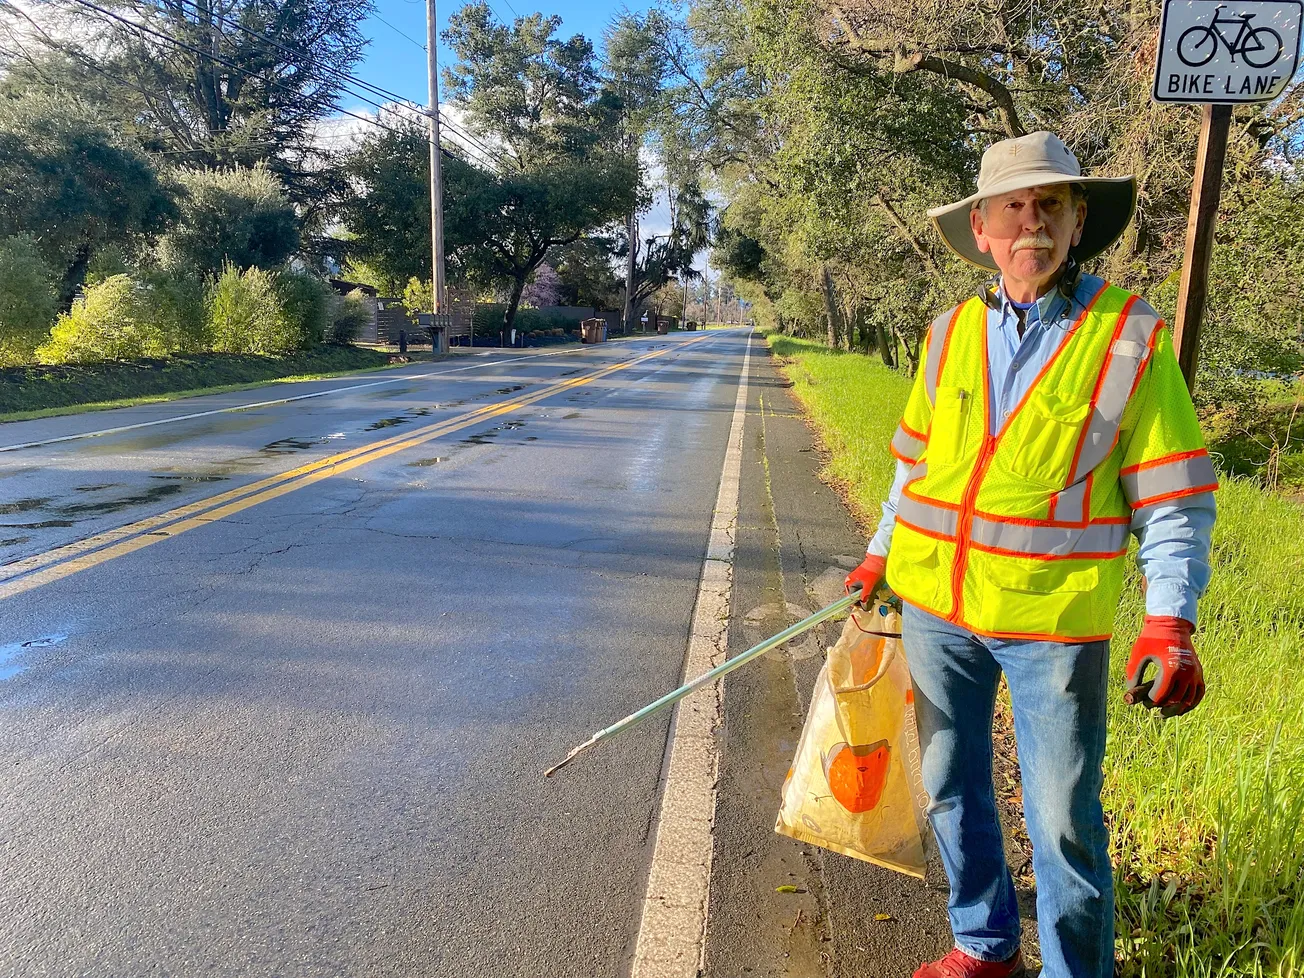 Blight Fighter: For 10 years Michael Haas has patrolled roadways between Napa and Yountville picking up trash